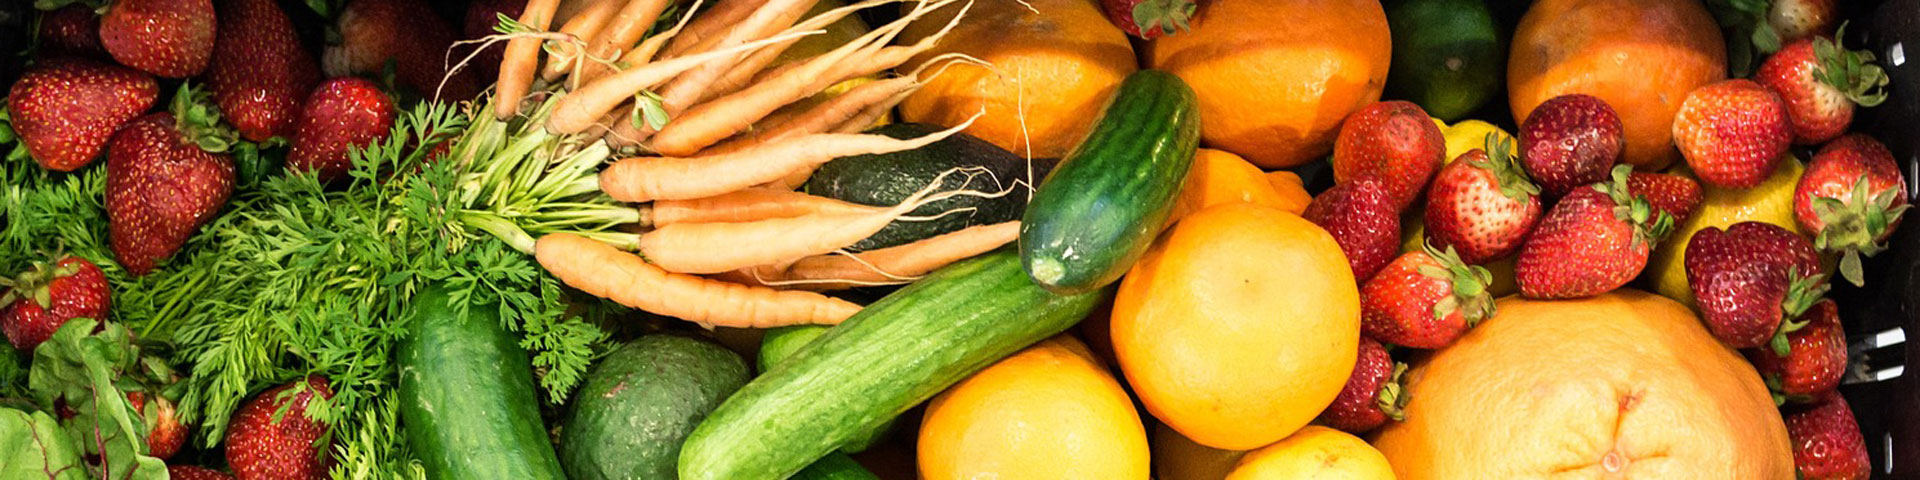 An assortment of vegetables and fruit including carrots, squash, oranges, and strawberries.